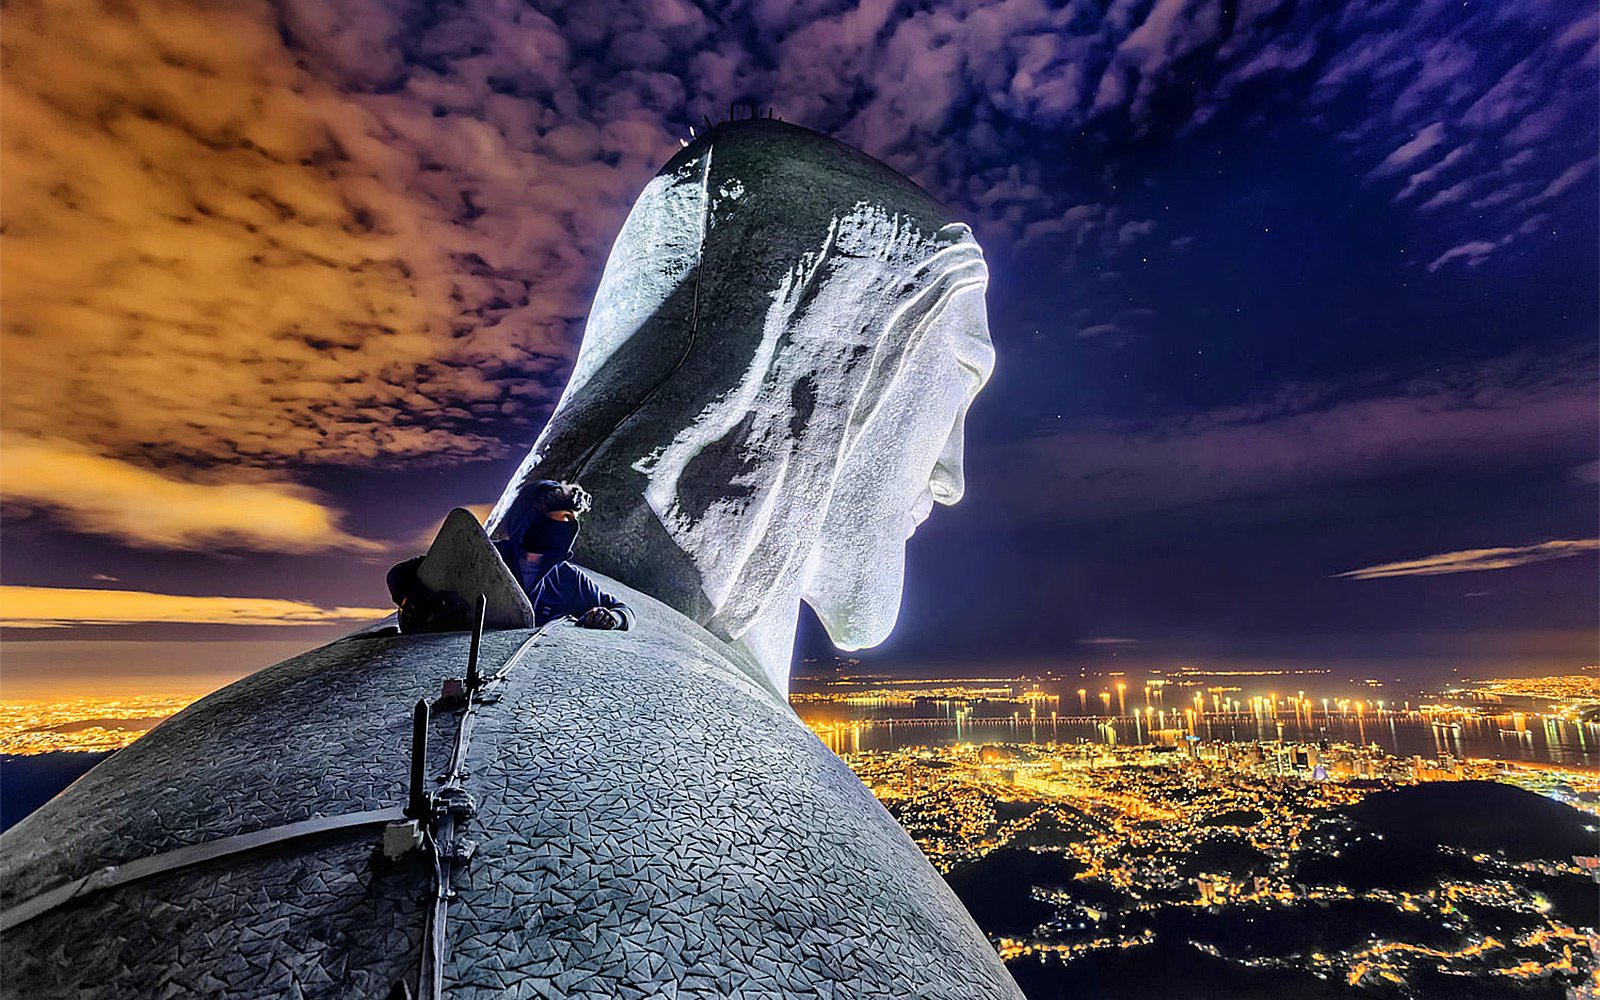 How to climb to the top of the statue of Christ the Redeemer in Rio de Janeiro